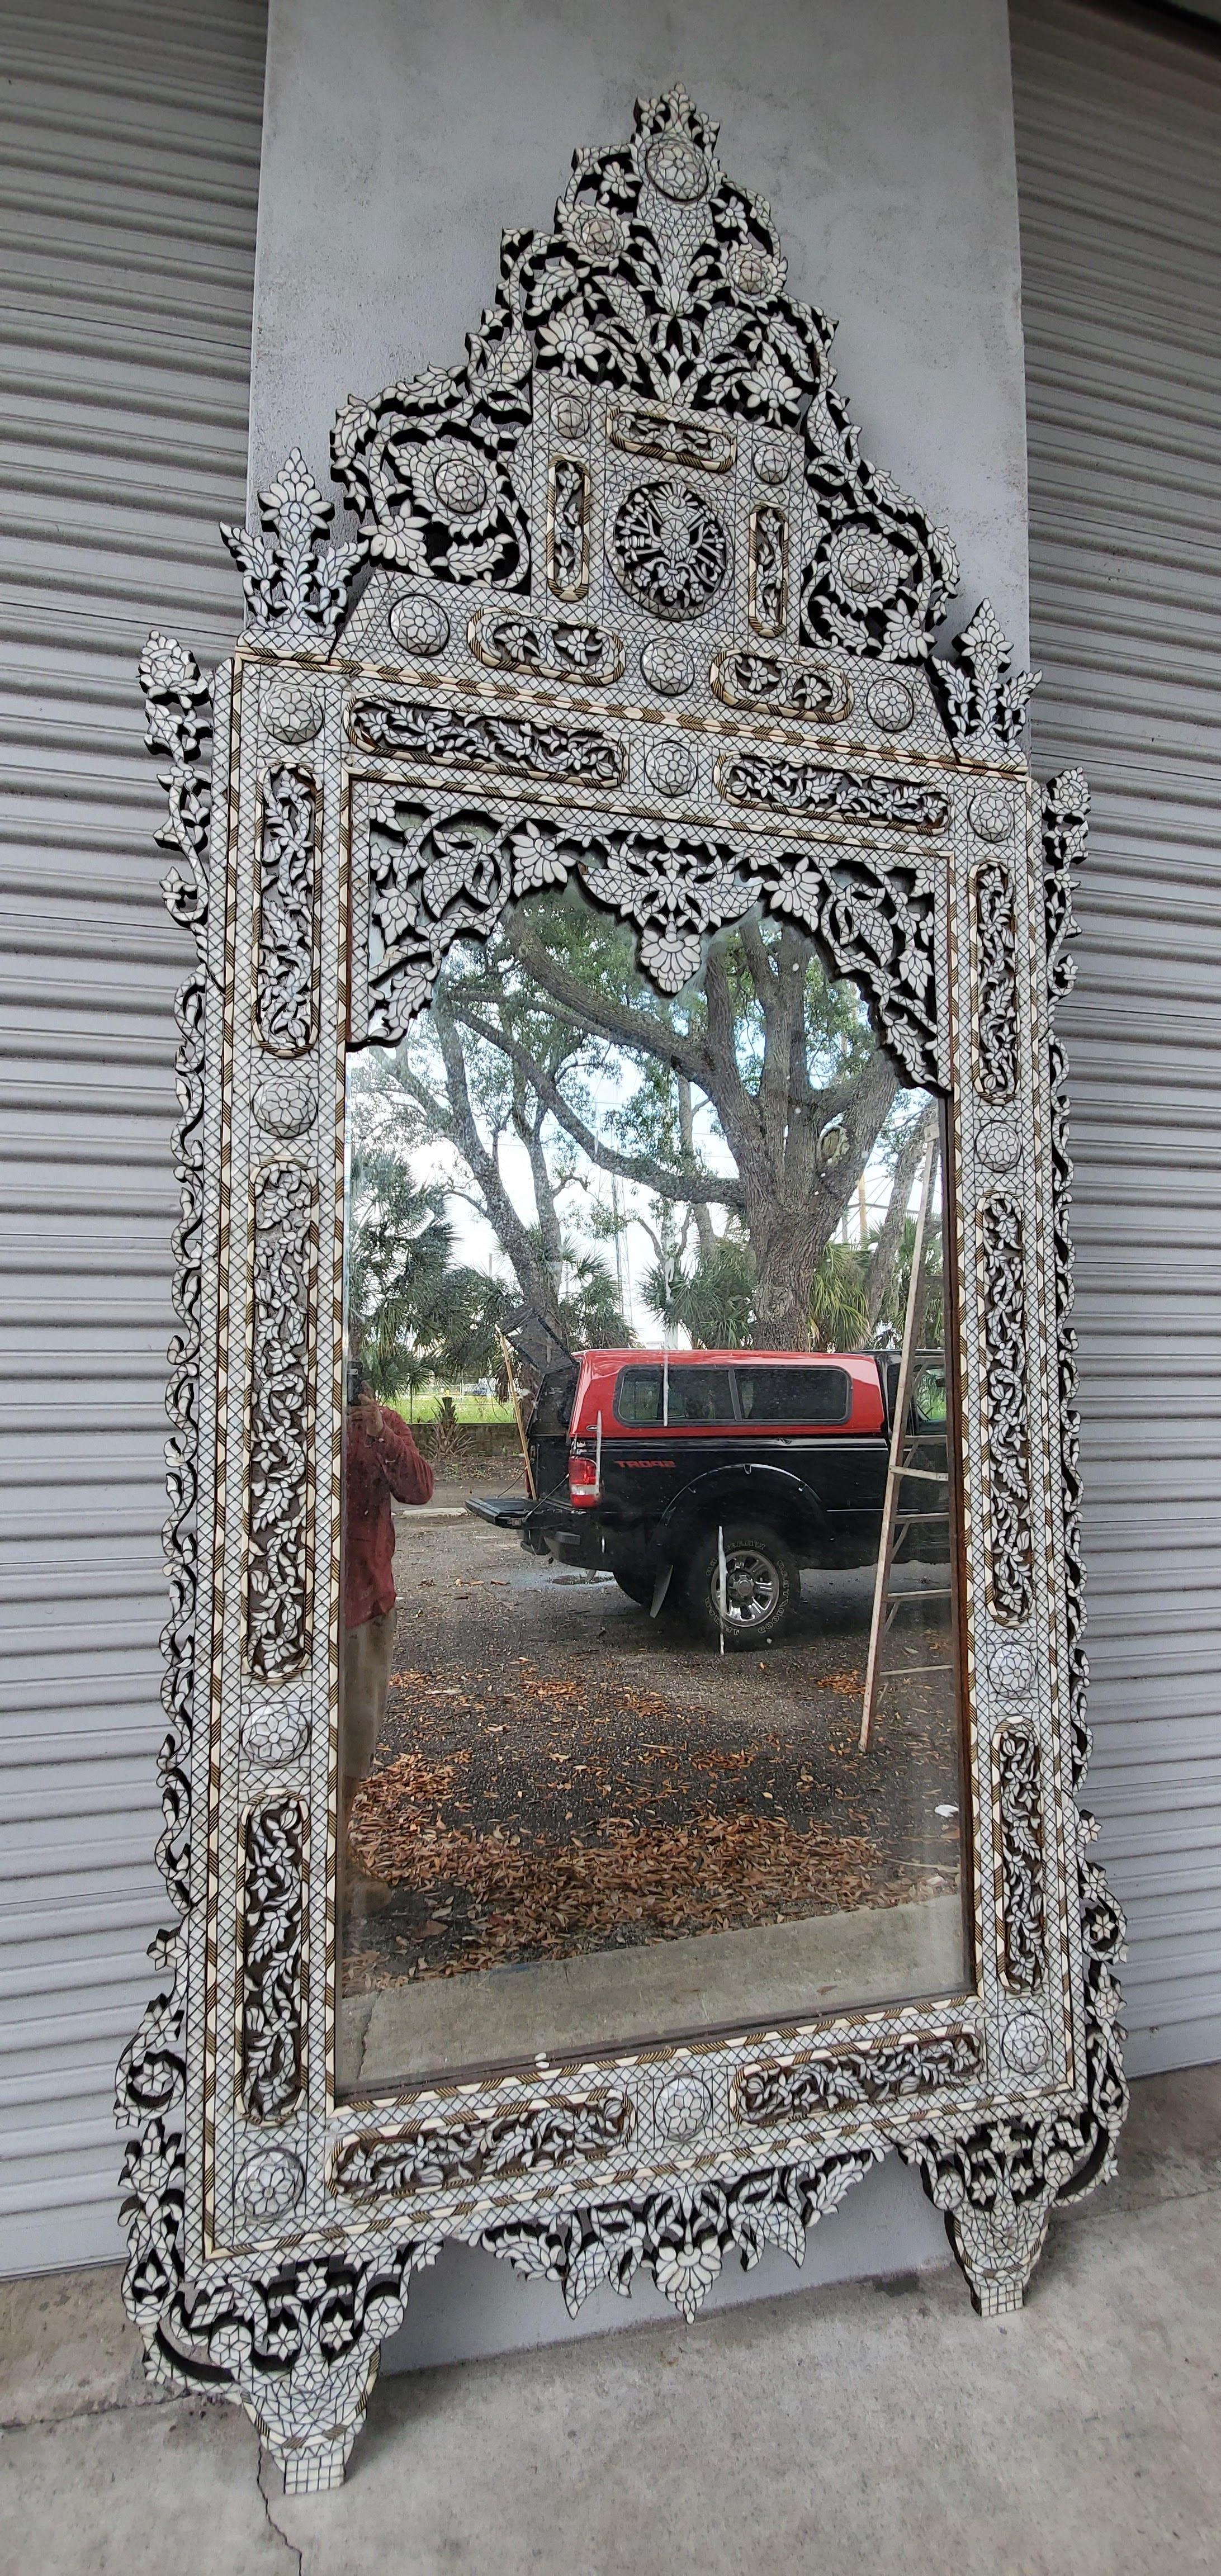 This antique handcrafted inlaid mirror is crafted from individuality cut pieces of mother of pearl and camel bone. The high bonnet top is geometric style design is detachable for easy transport.
Details.